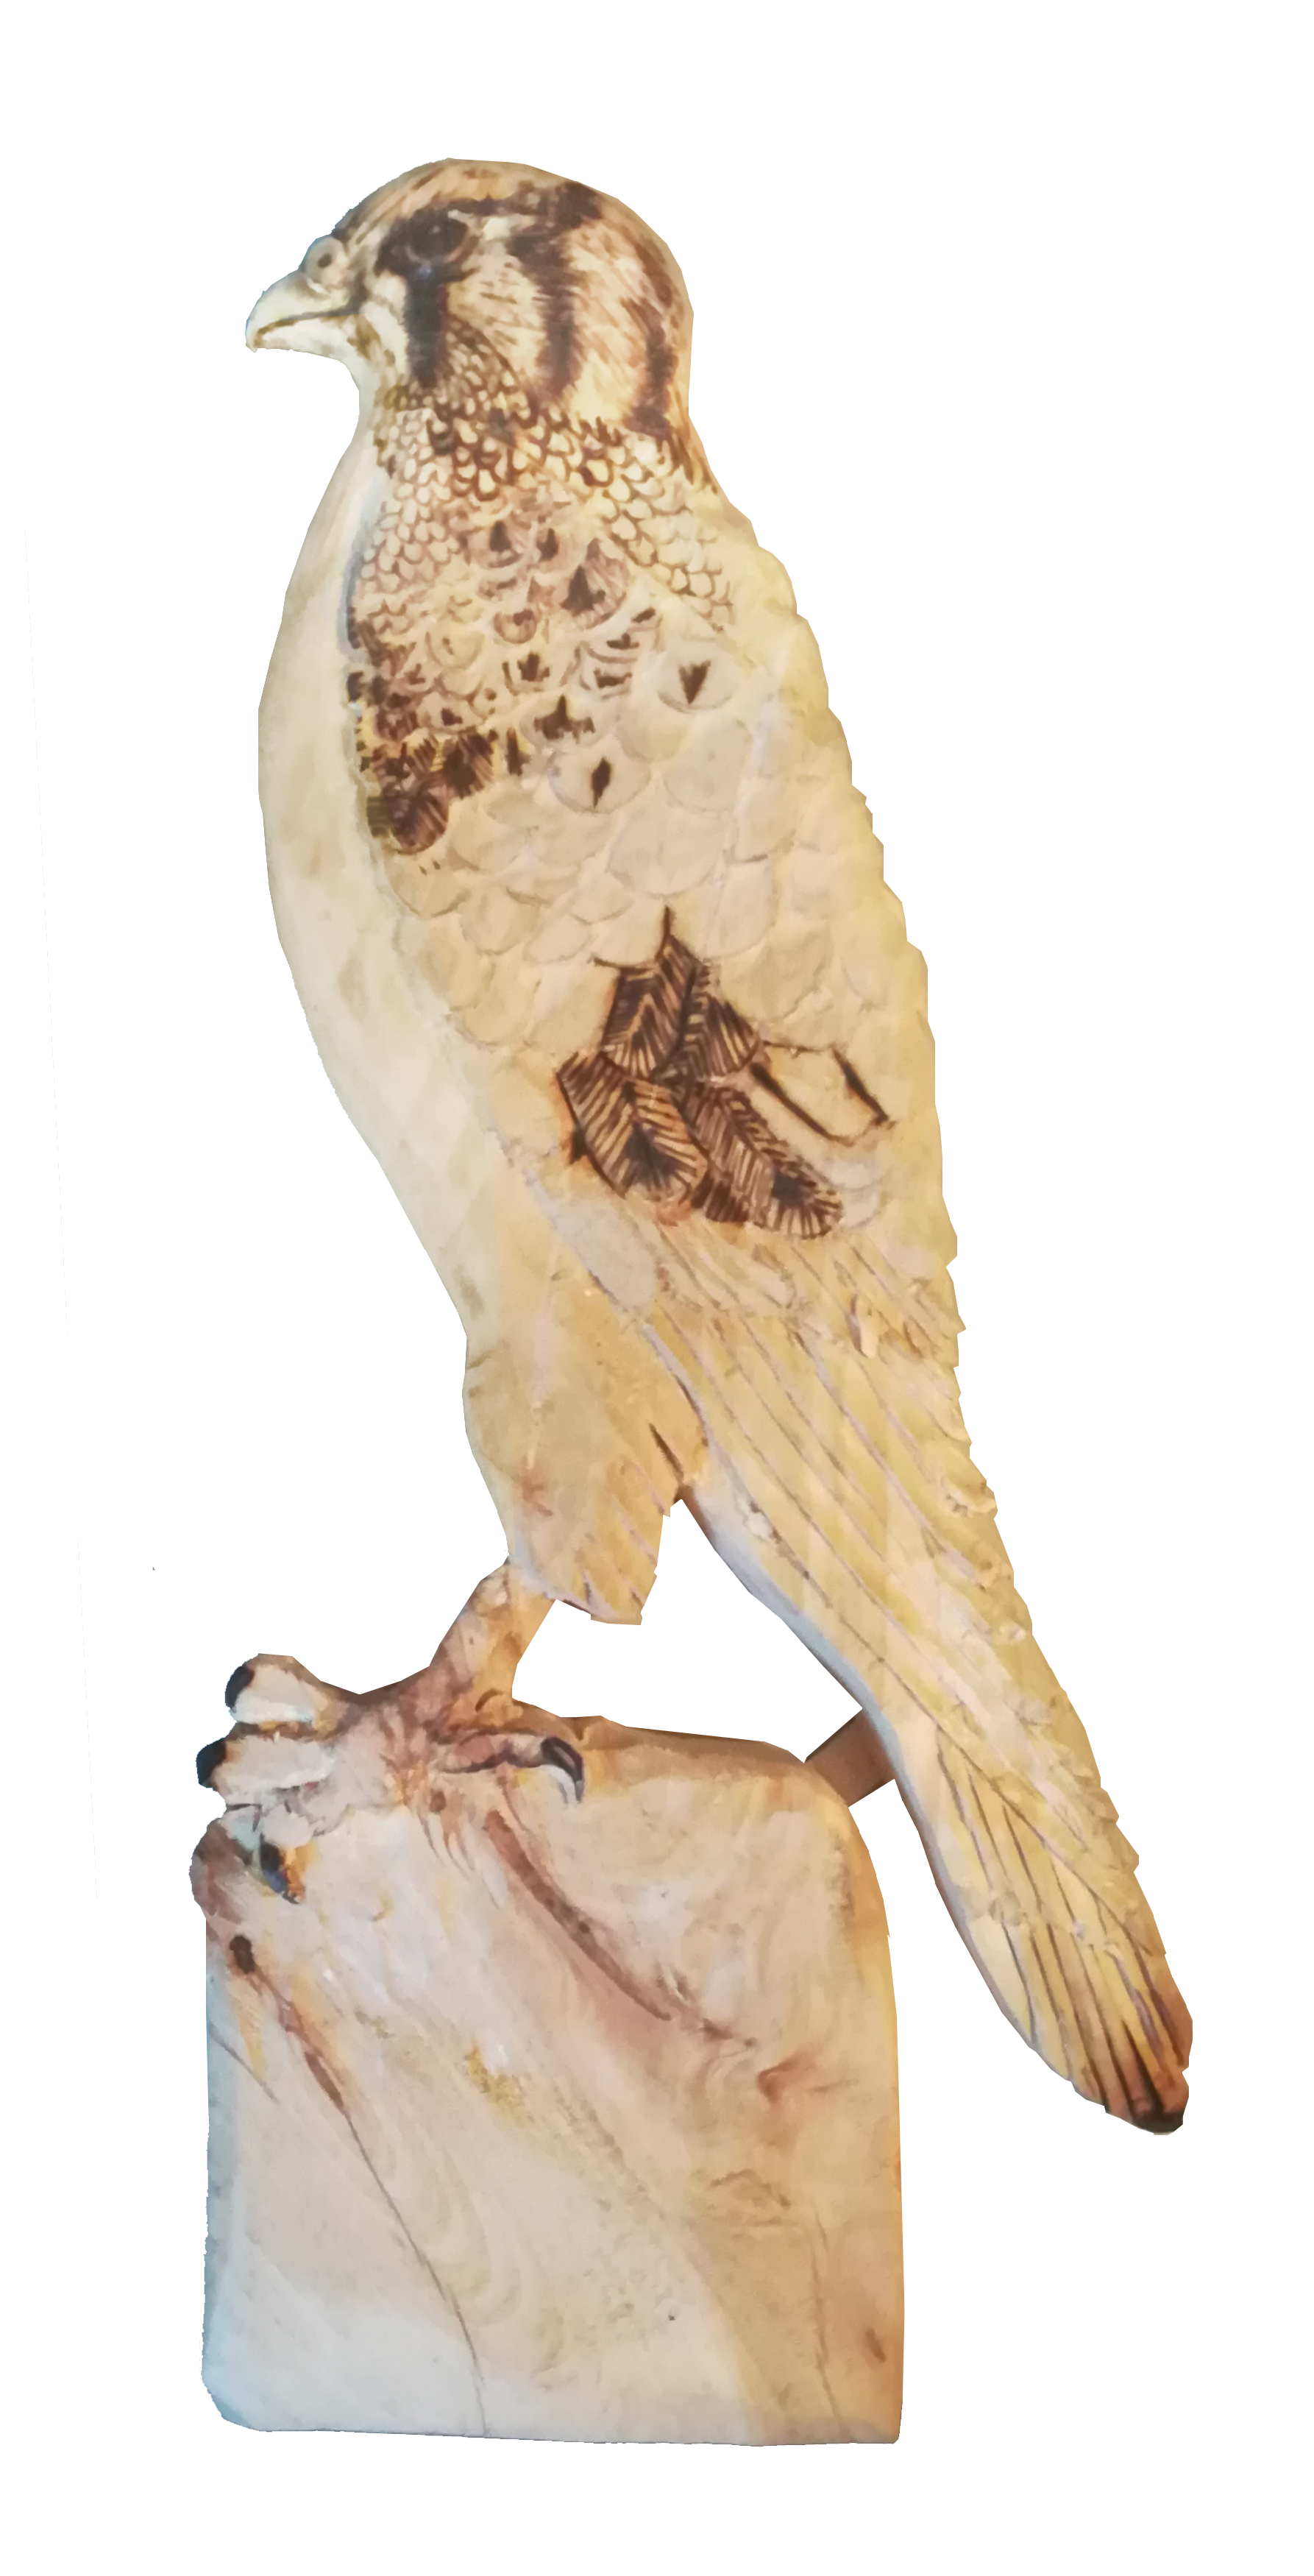 Handmade American Kestrel Pyrograph and Carving by snazzie-designz